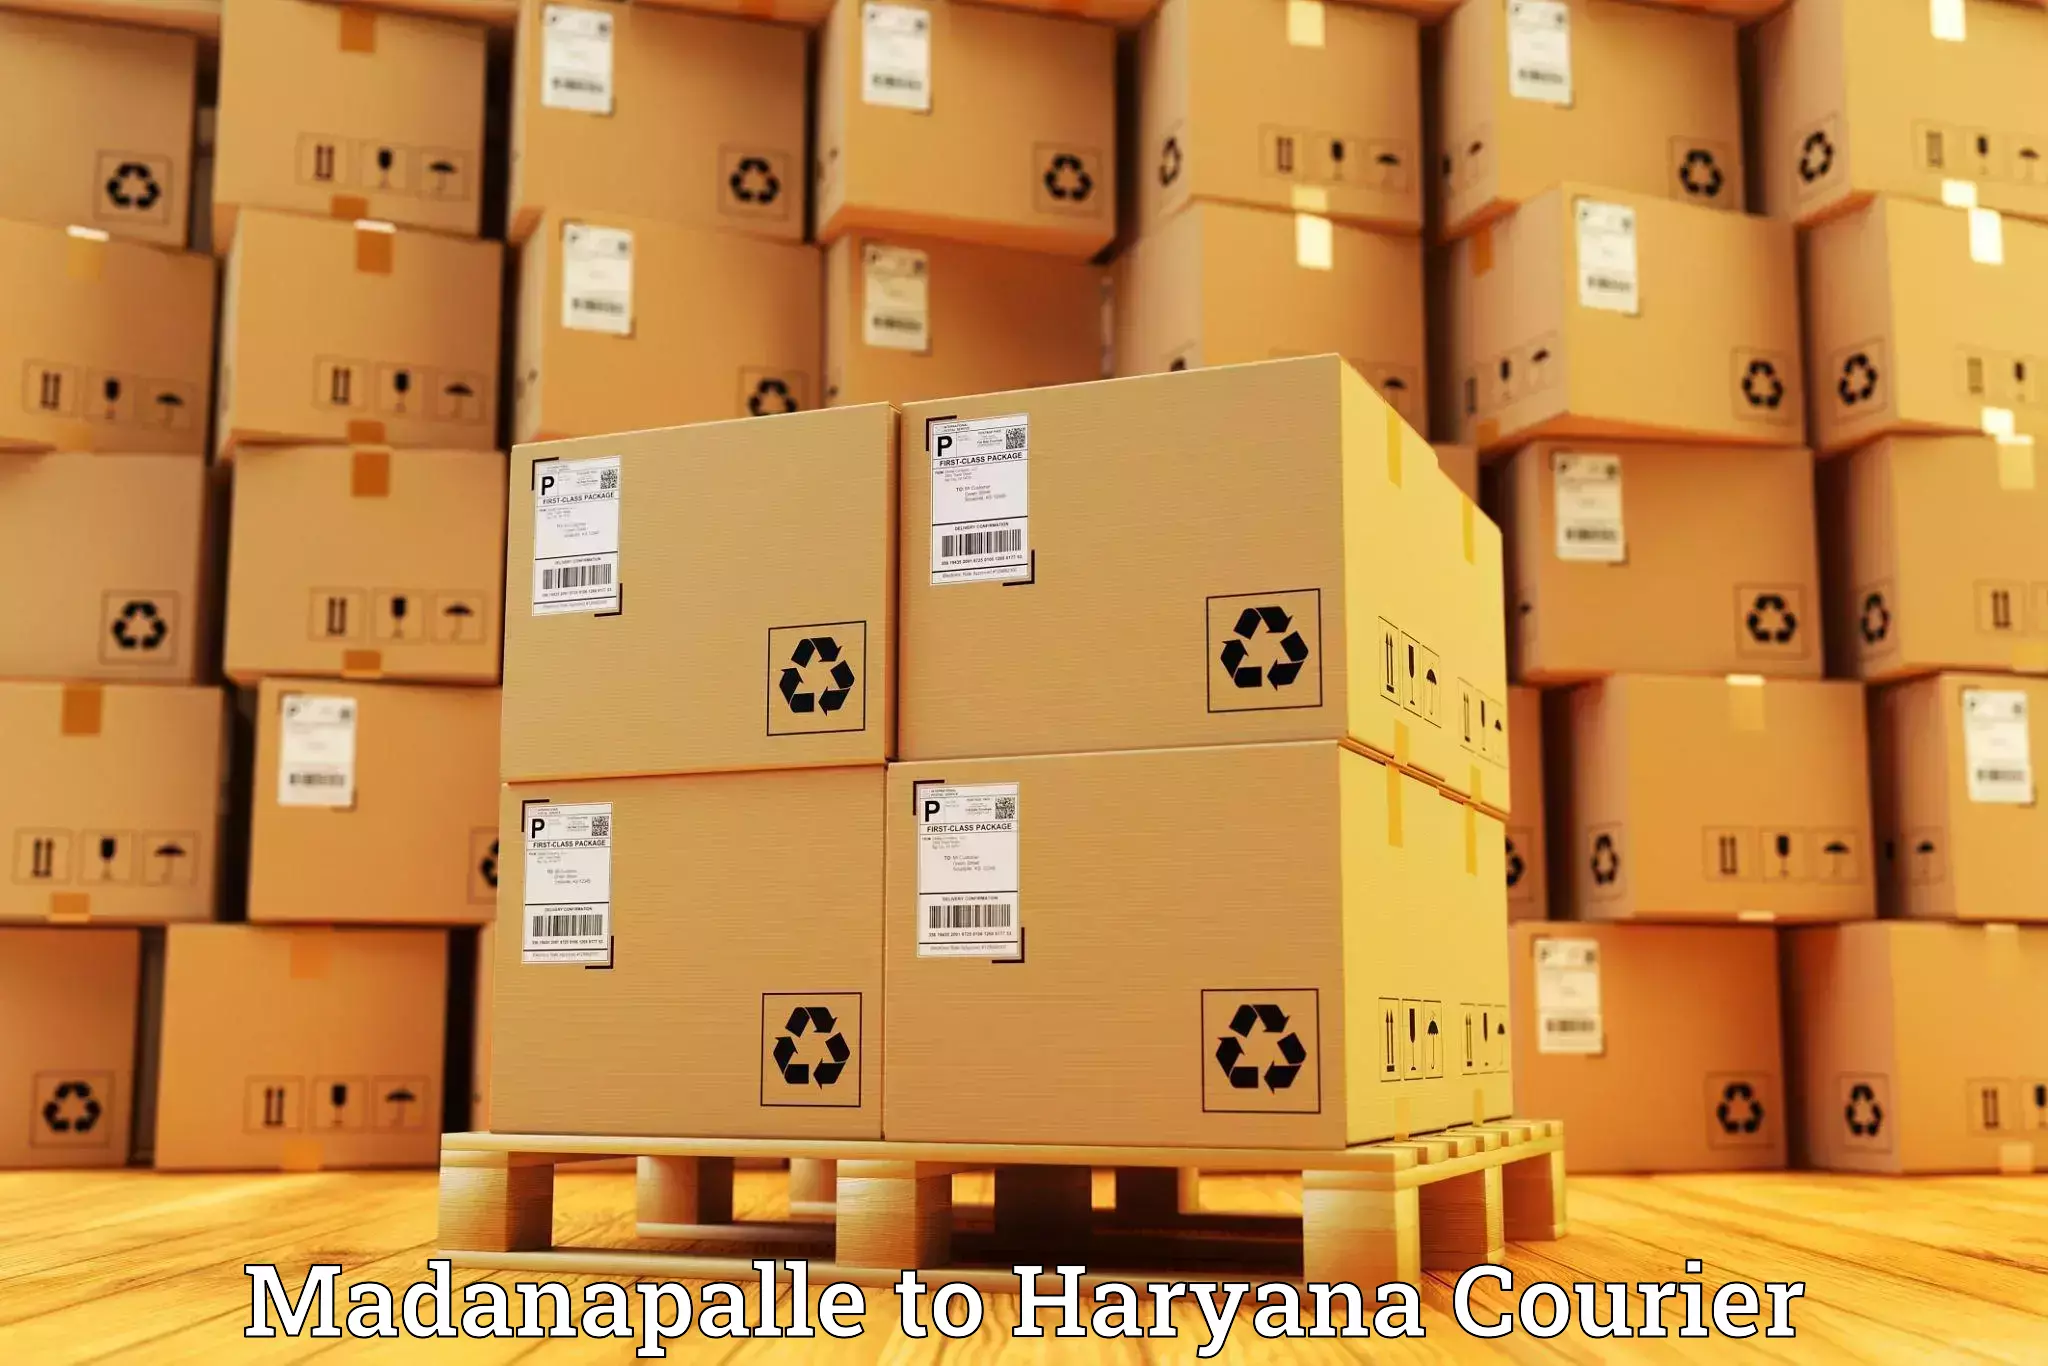 Tracking updates in Madanapalle to NCR Haryana